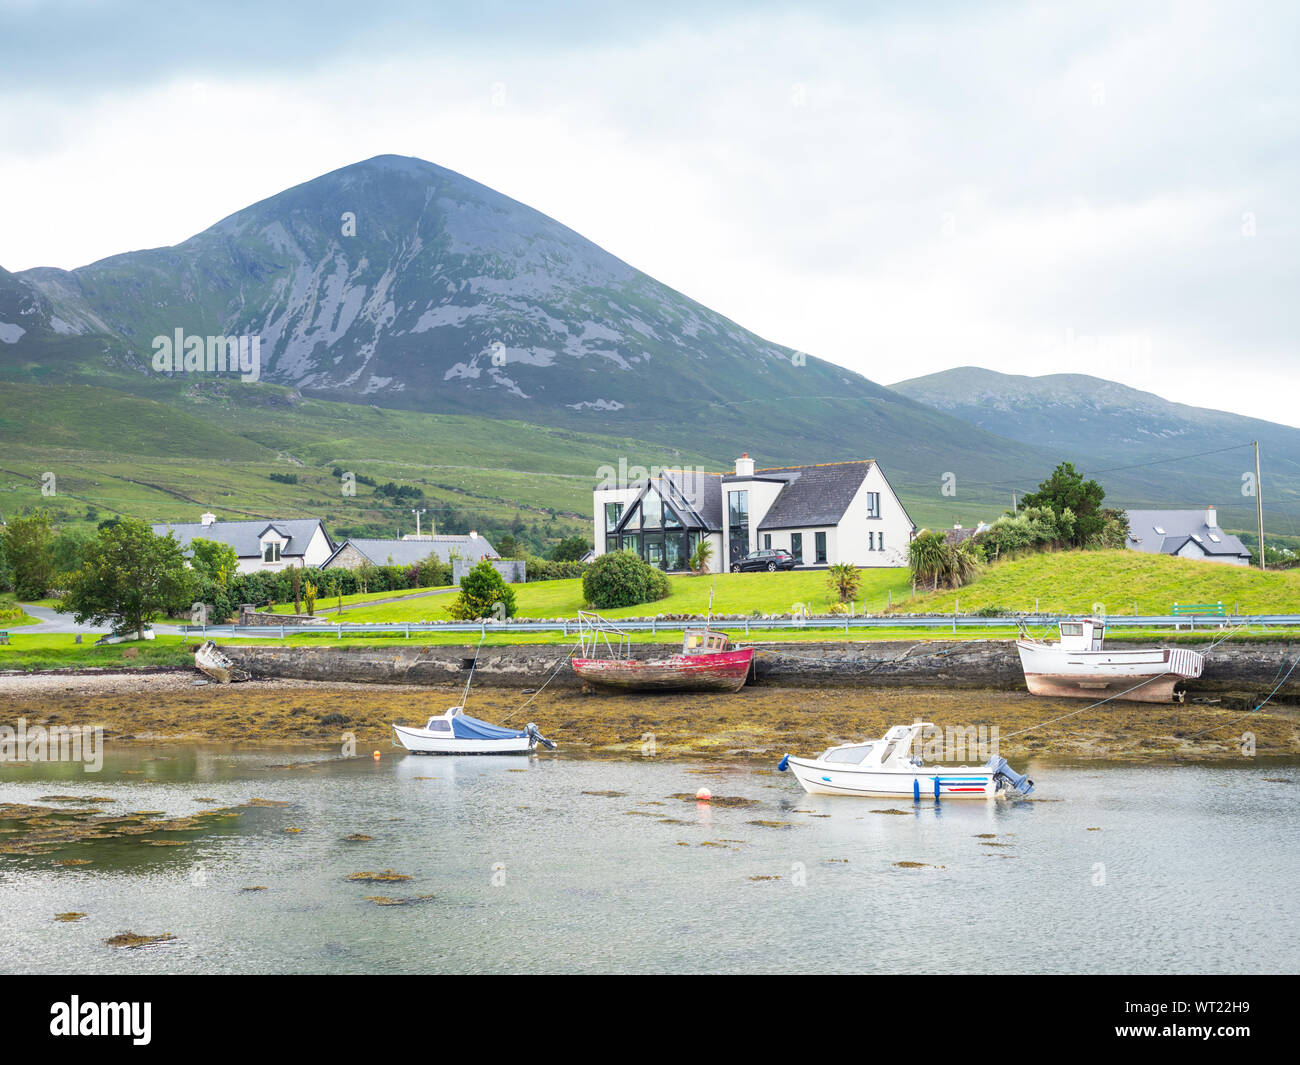 A small fishing harbour in Clew Bay, near Westport in County Mayo, Ireland. Stock Photo